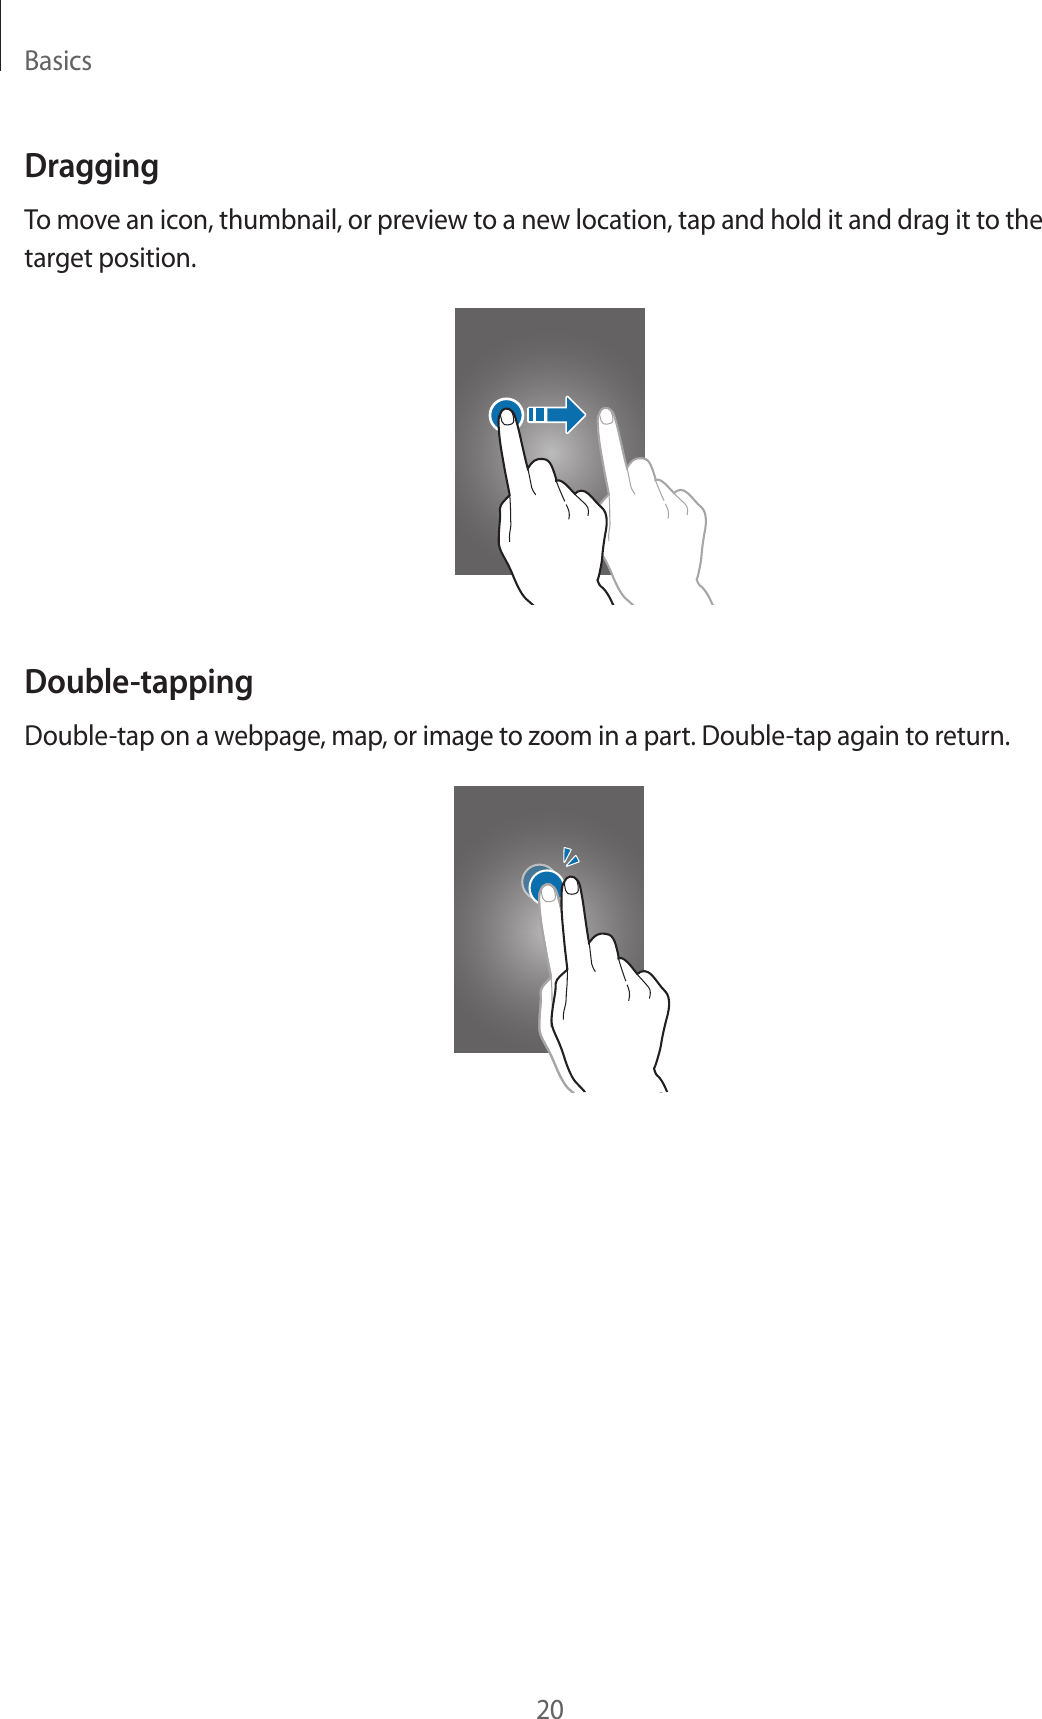 Basics20DraggingTo move an icon, thumbnail, or preview to a new location, tap and hold it and drag it to the target position.Double-tappingDouble-tap on a webpage, map, or image to zoom in a part. Double-tap again to return.